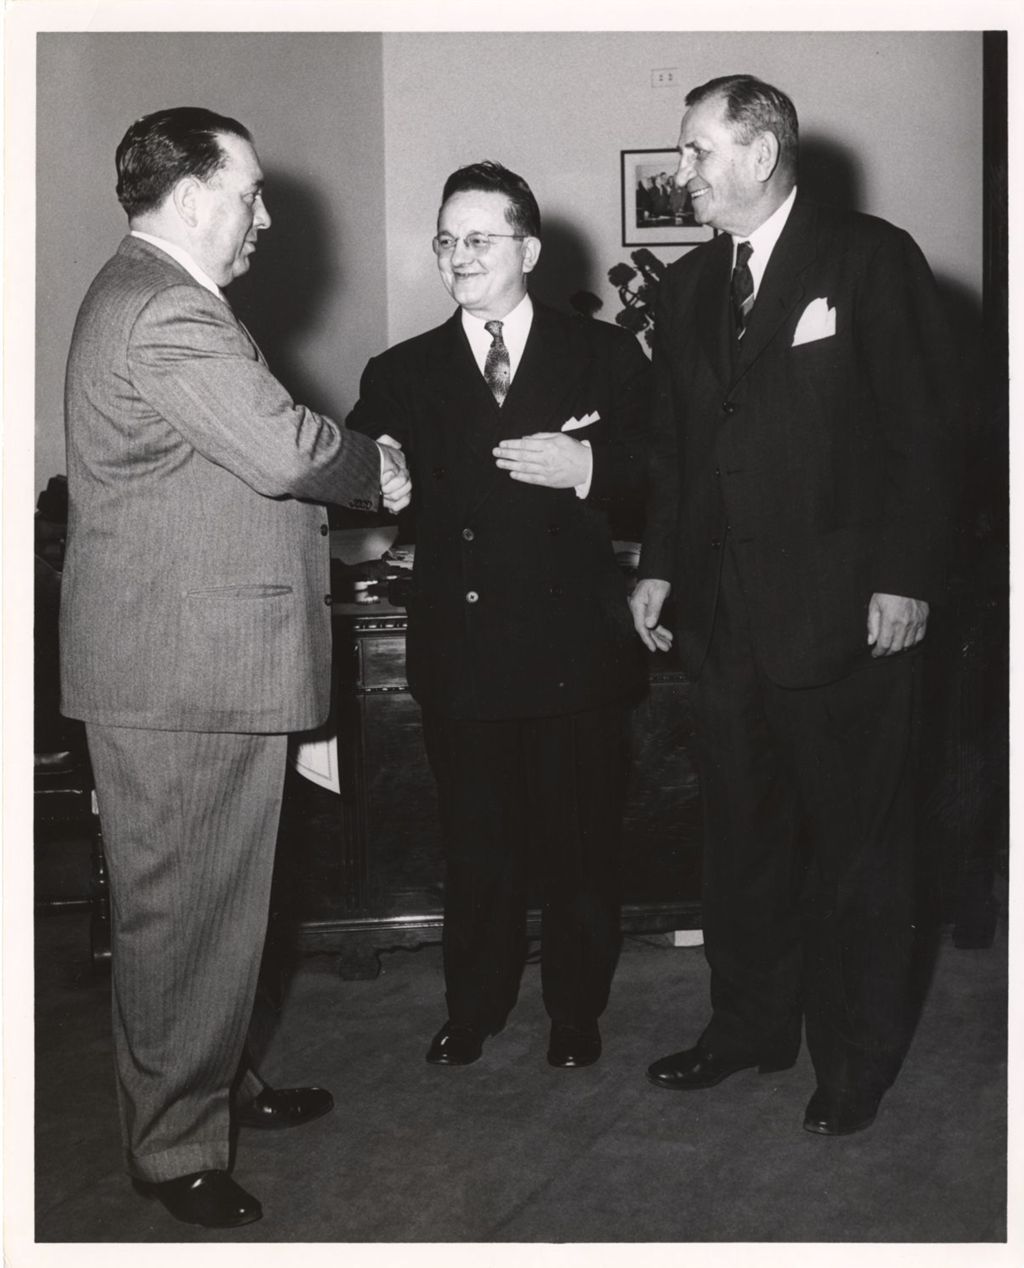 Miniature of Richard J. Daley shaking hands with Anthony Serito